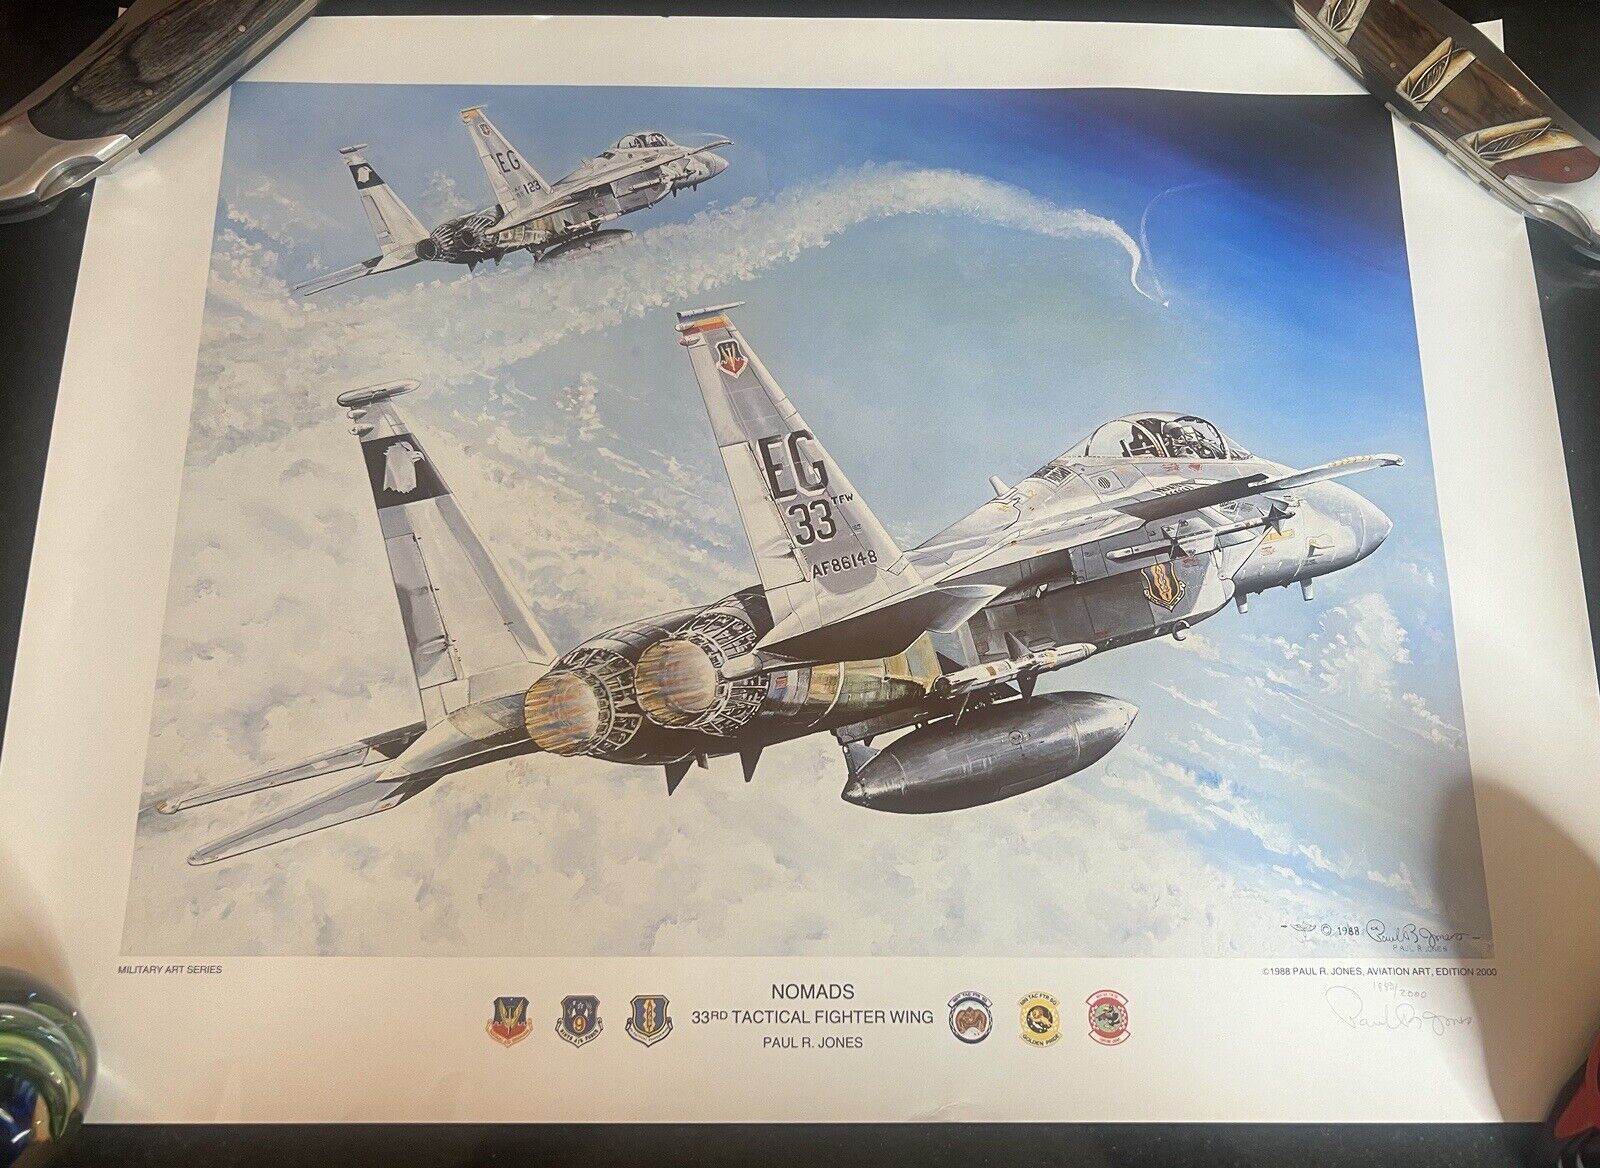 Paul R Jones Military Art Series NOMADS 33rd Tactical Fighter Wing Print 18”x24”